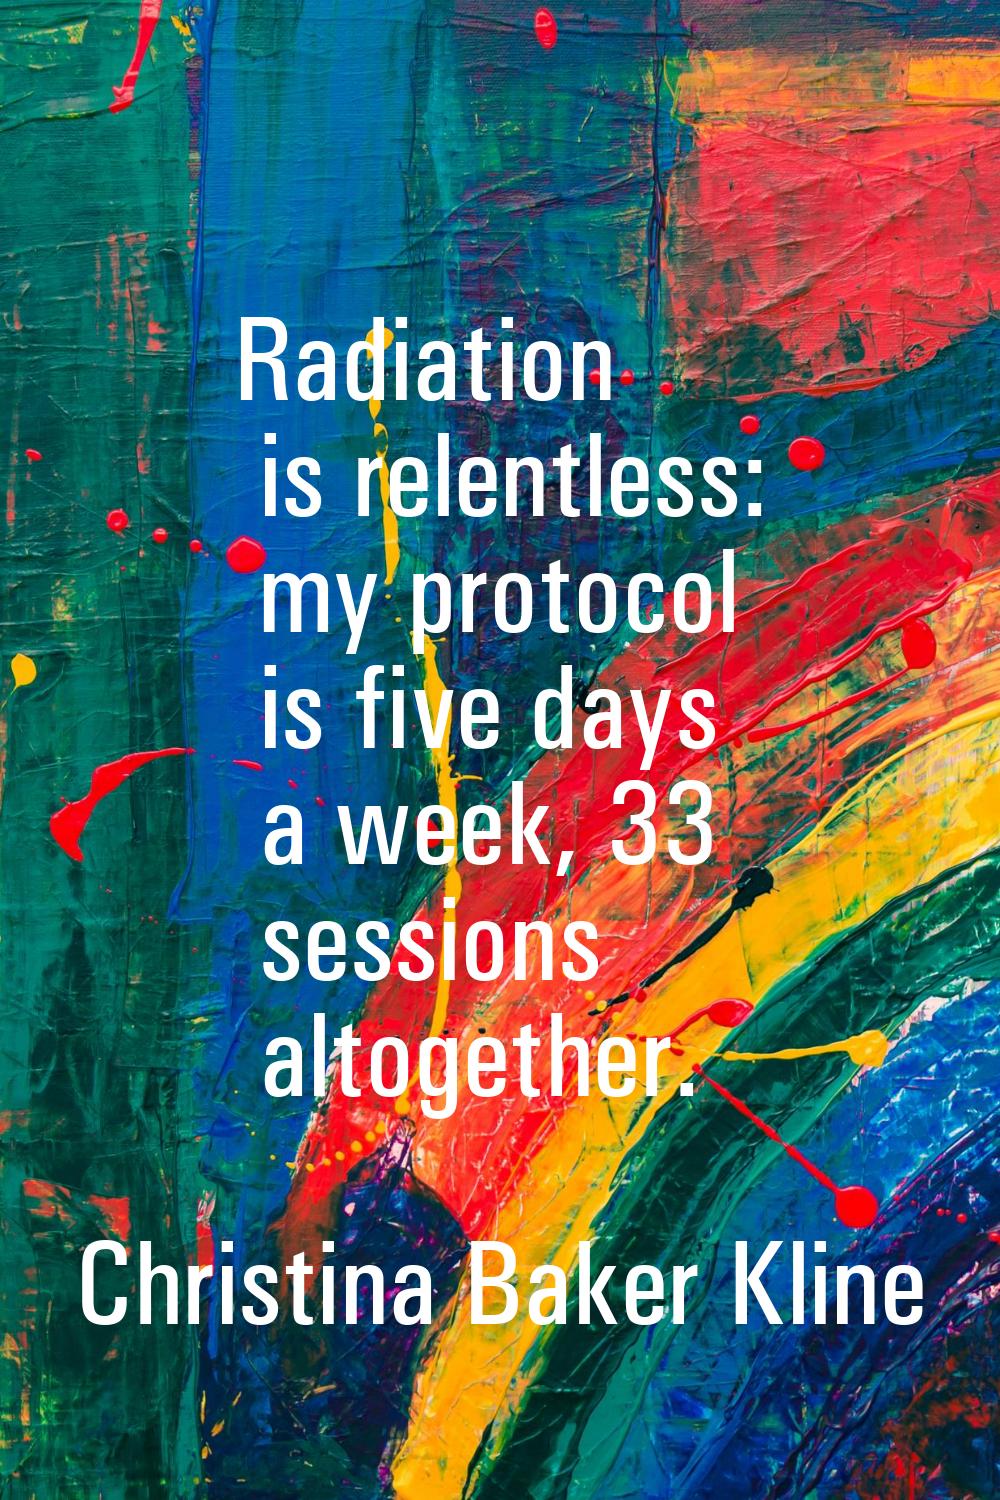 Radiation is relentless: my protocol is five days a week, 33 sessions altogether.